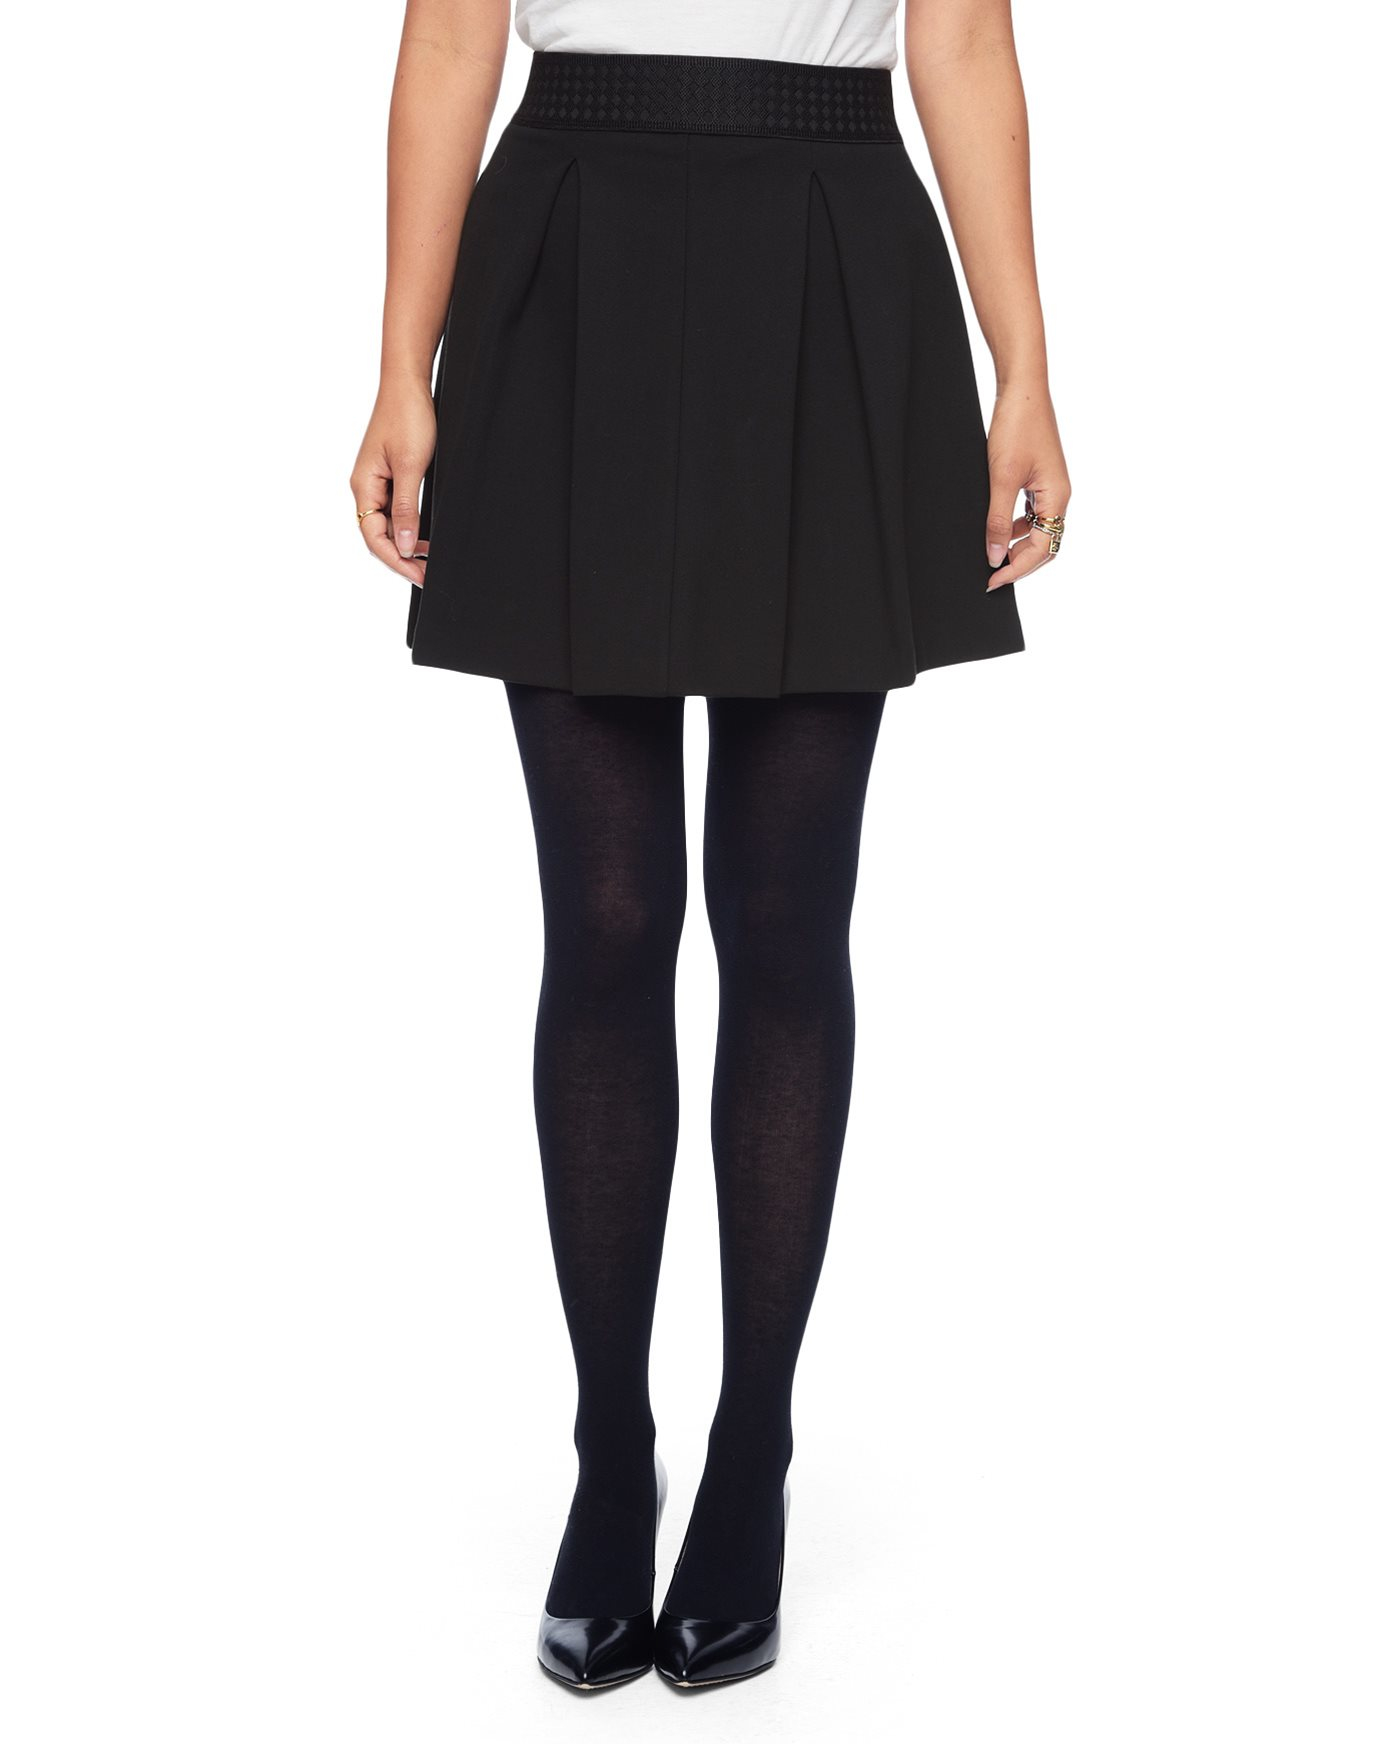 Juicy couture Pleated Ponte Skirt in Black | Lyst